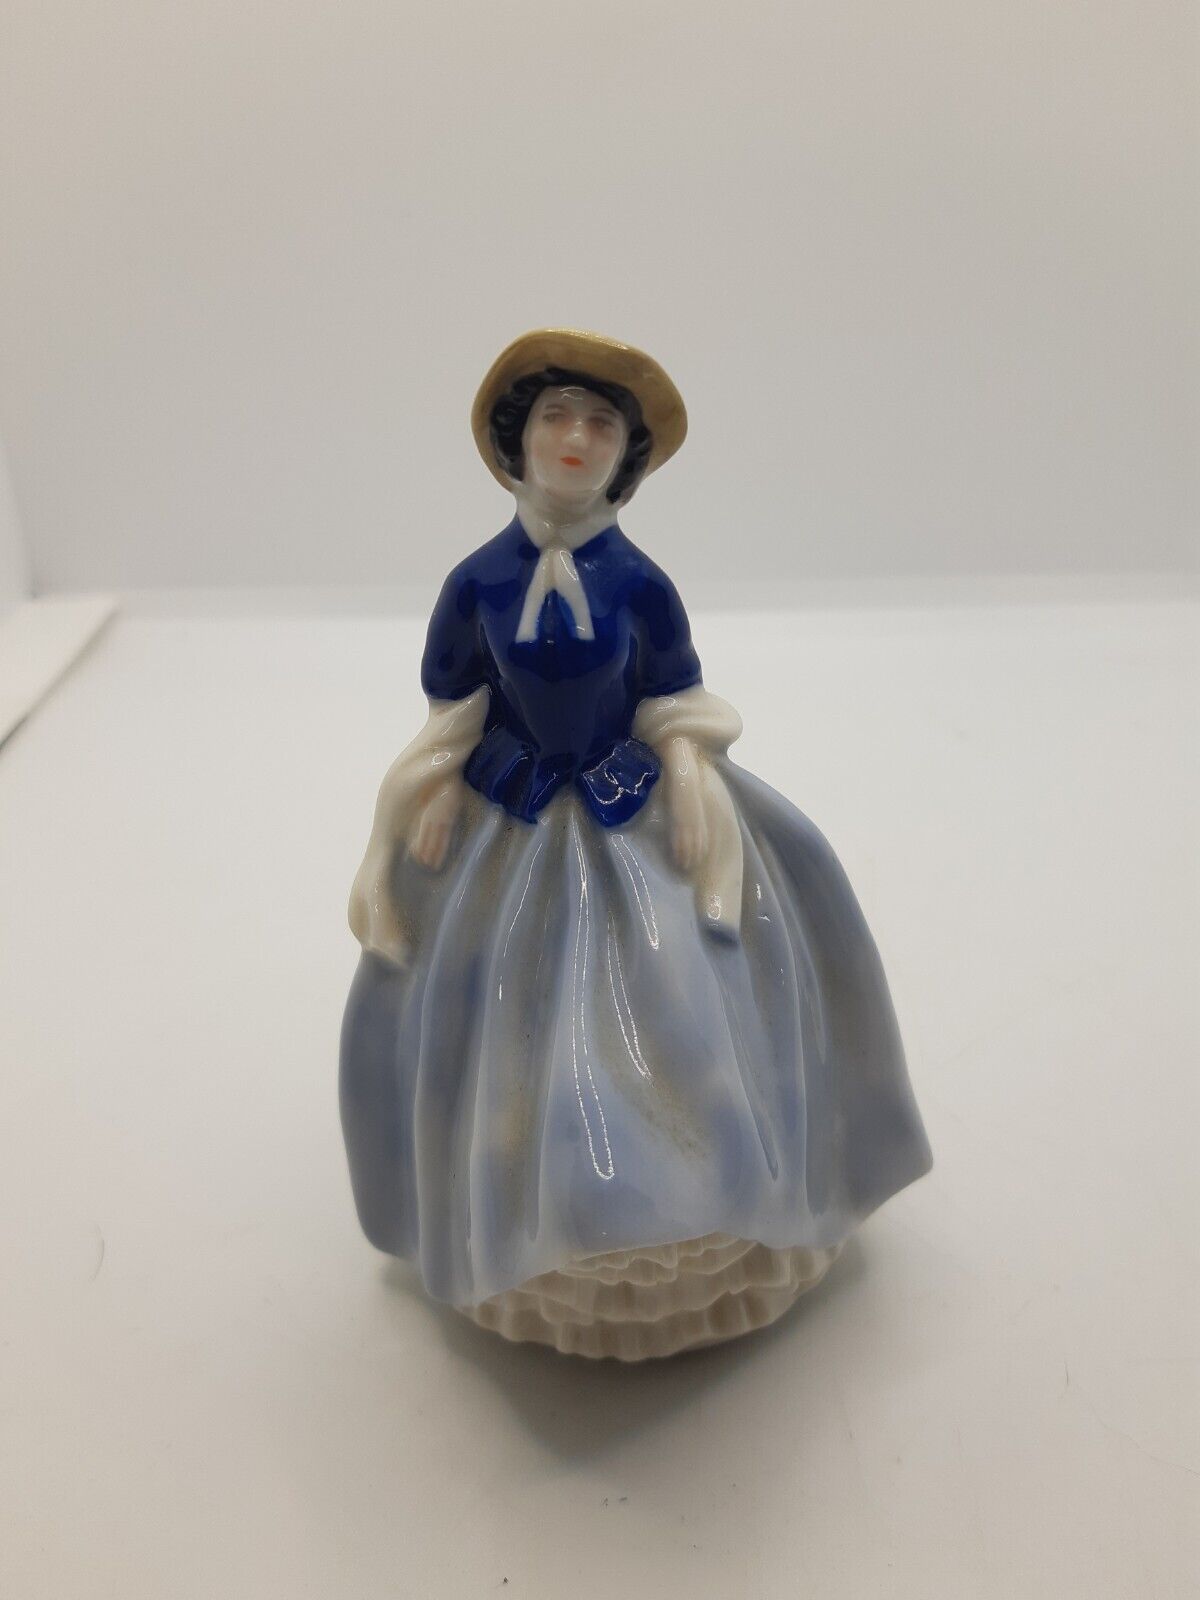 MELISSA MY FAIR LADY BY WADE MADE IN ENGLAND Figurine